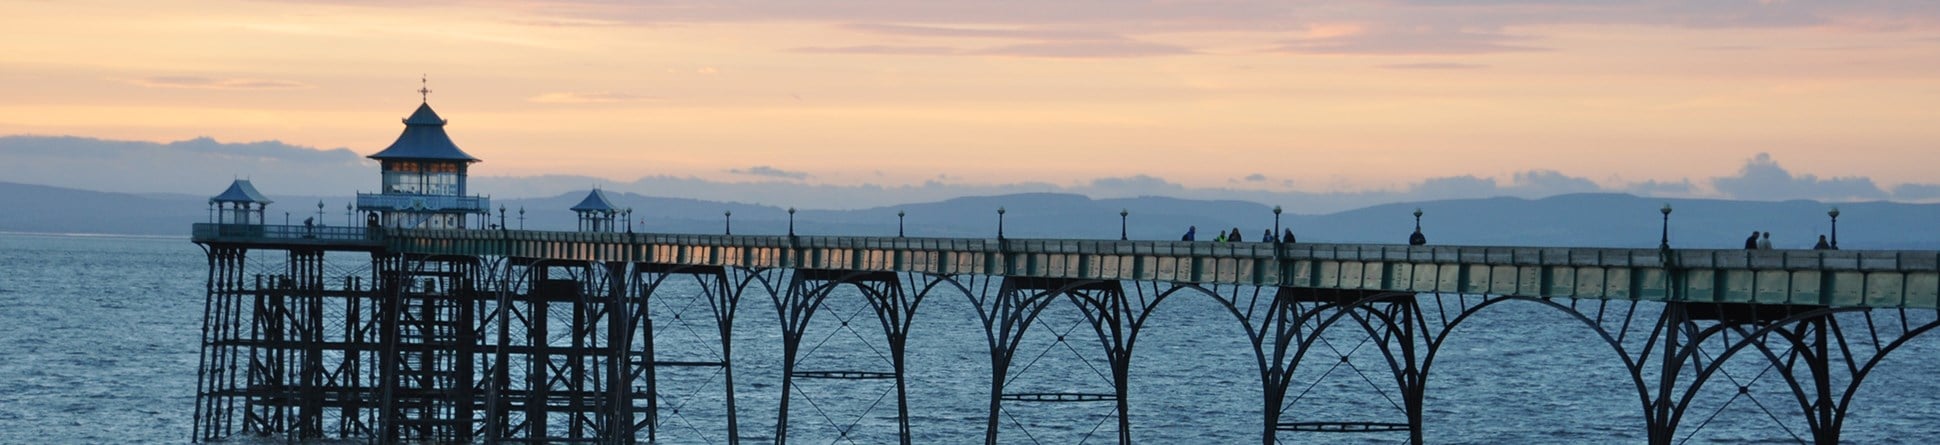 A photo of Clevedon Pier at sunset